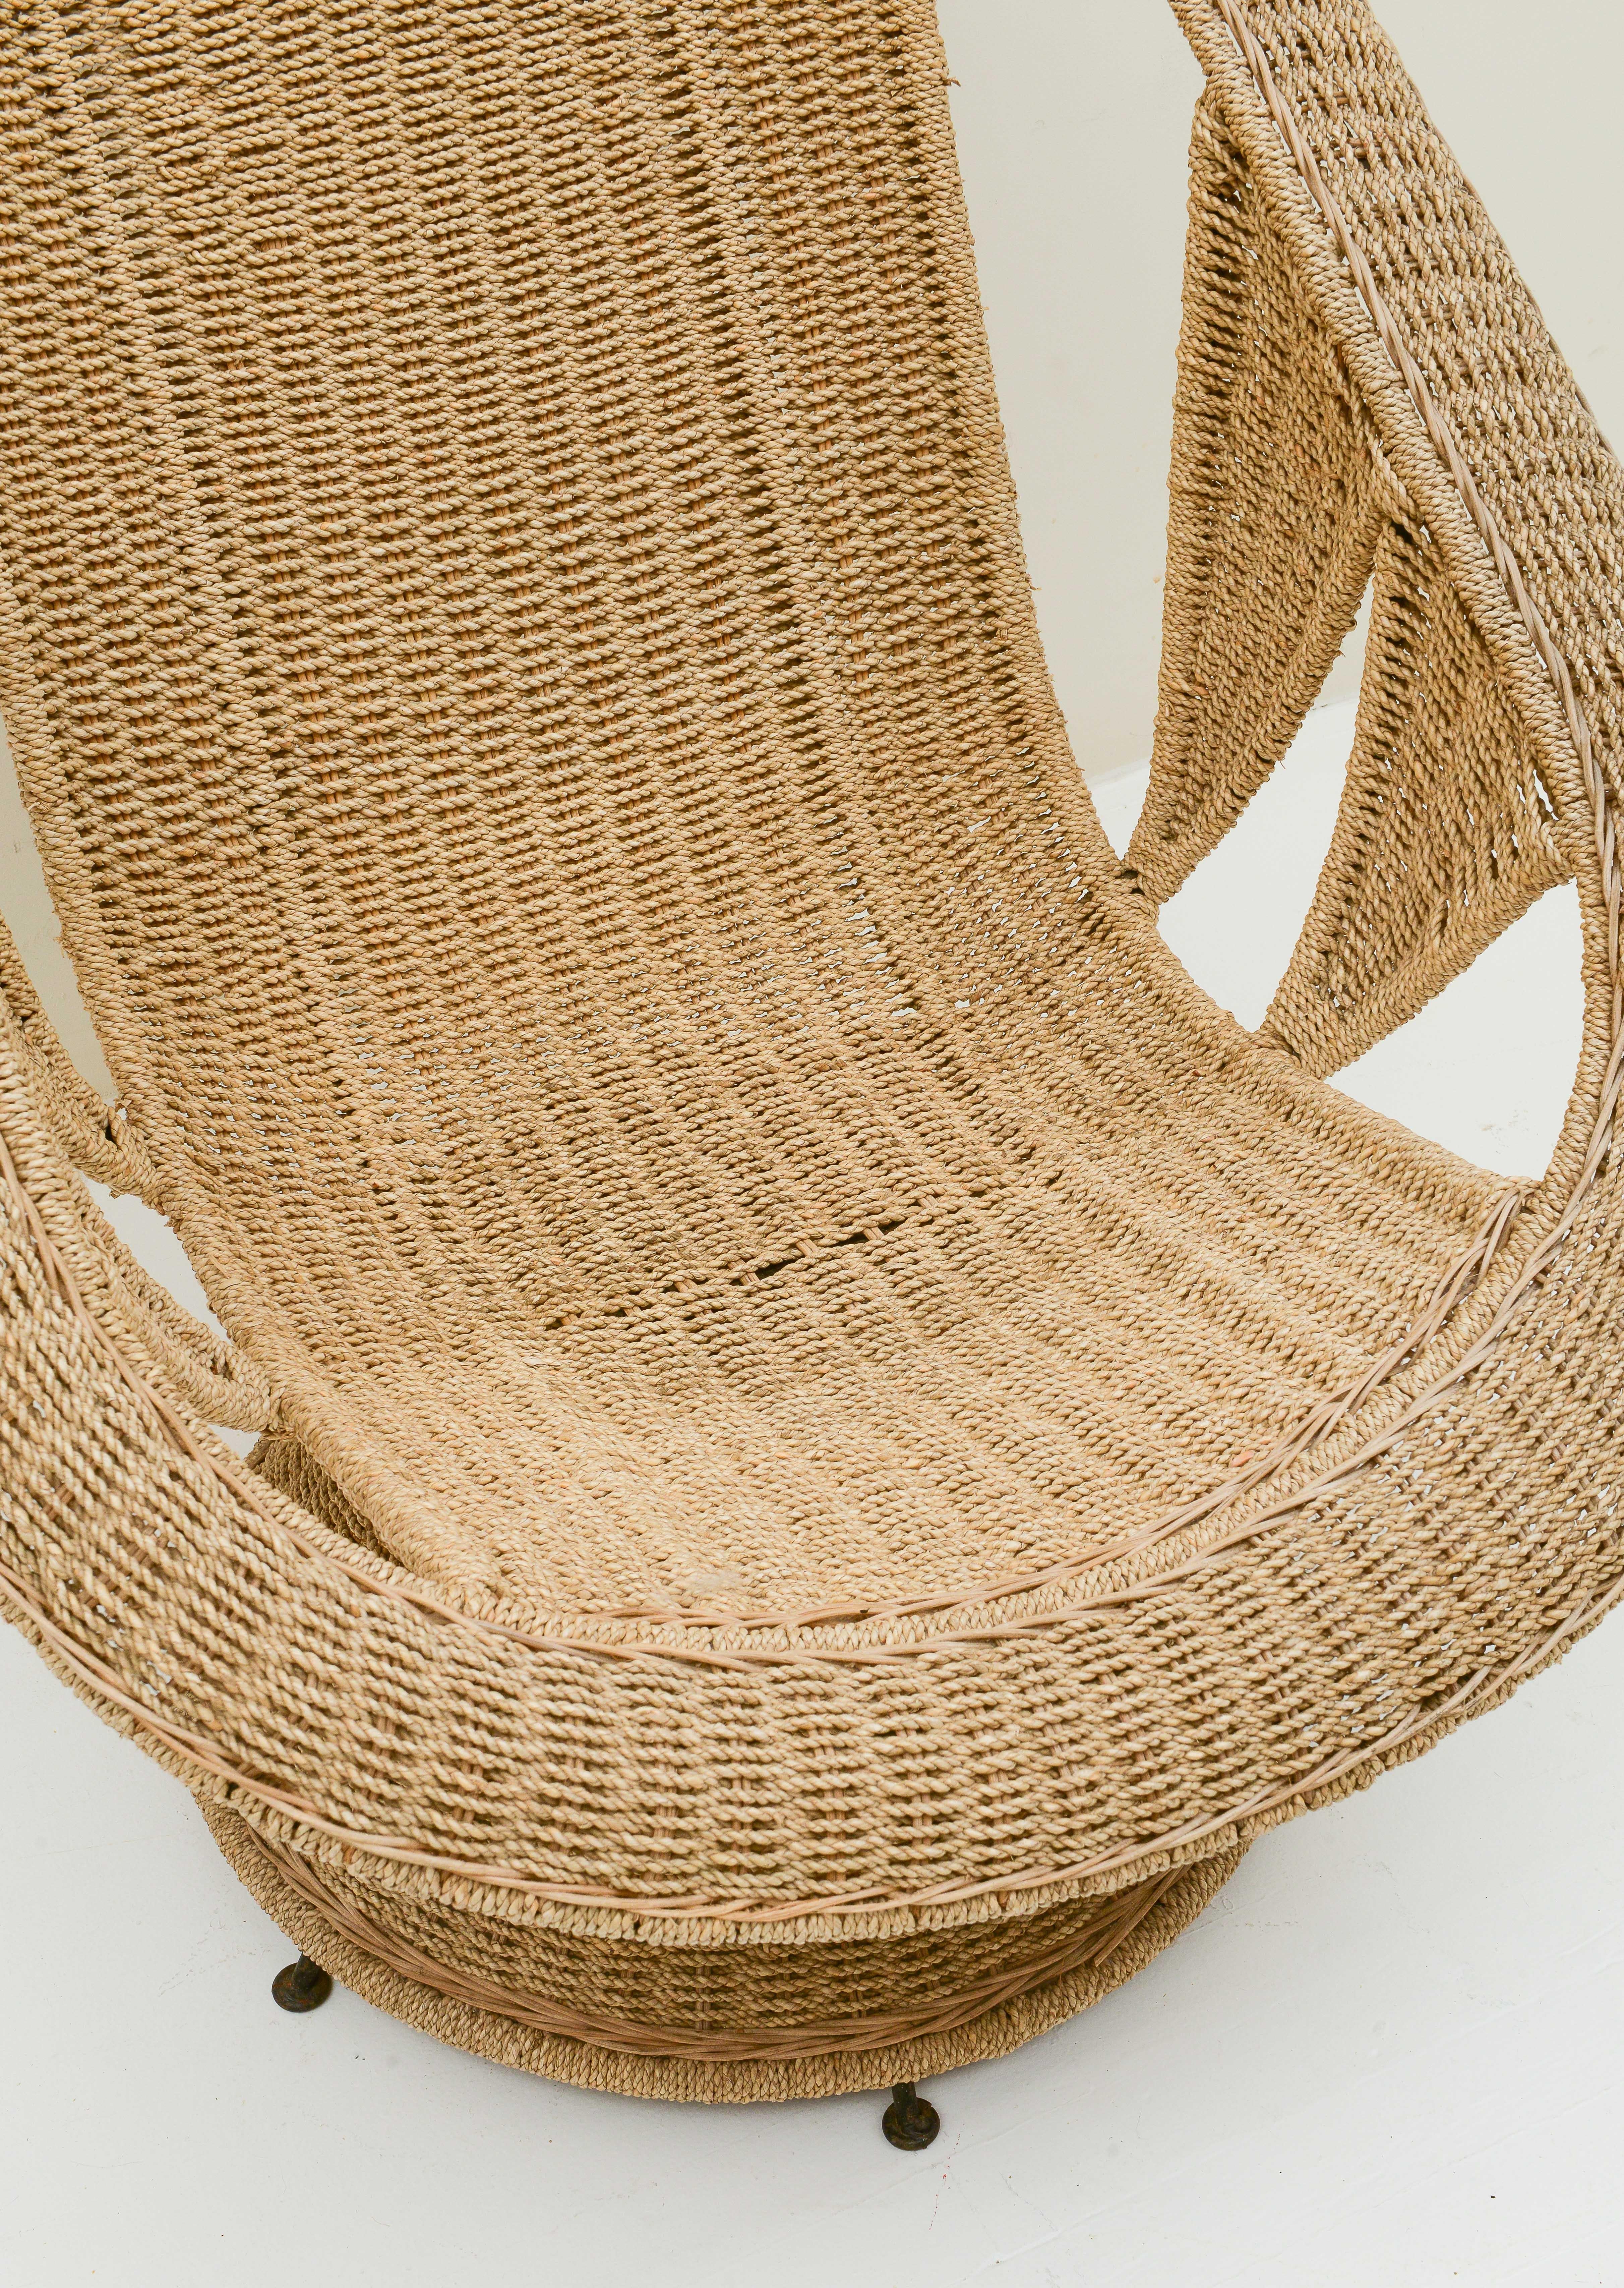 French Vintage Large Wicker Woven Chair with Incredible Detailing, France, 1970's For Sale